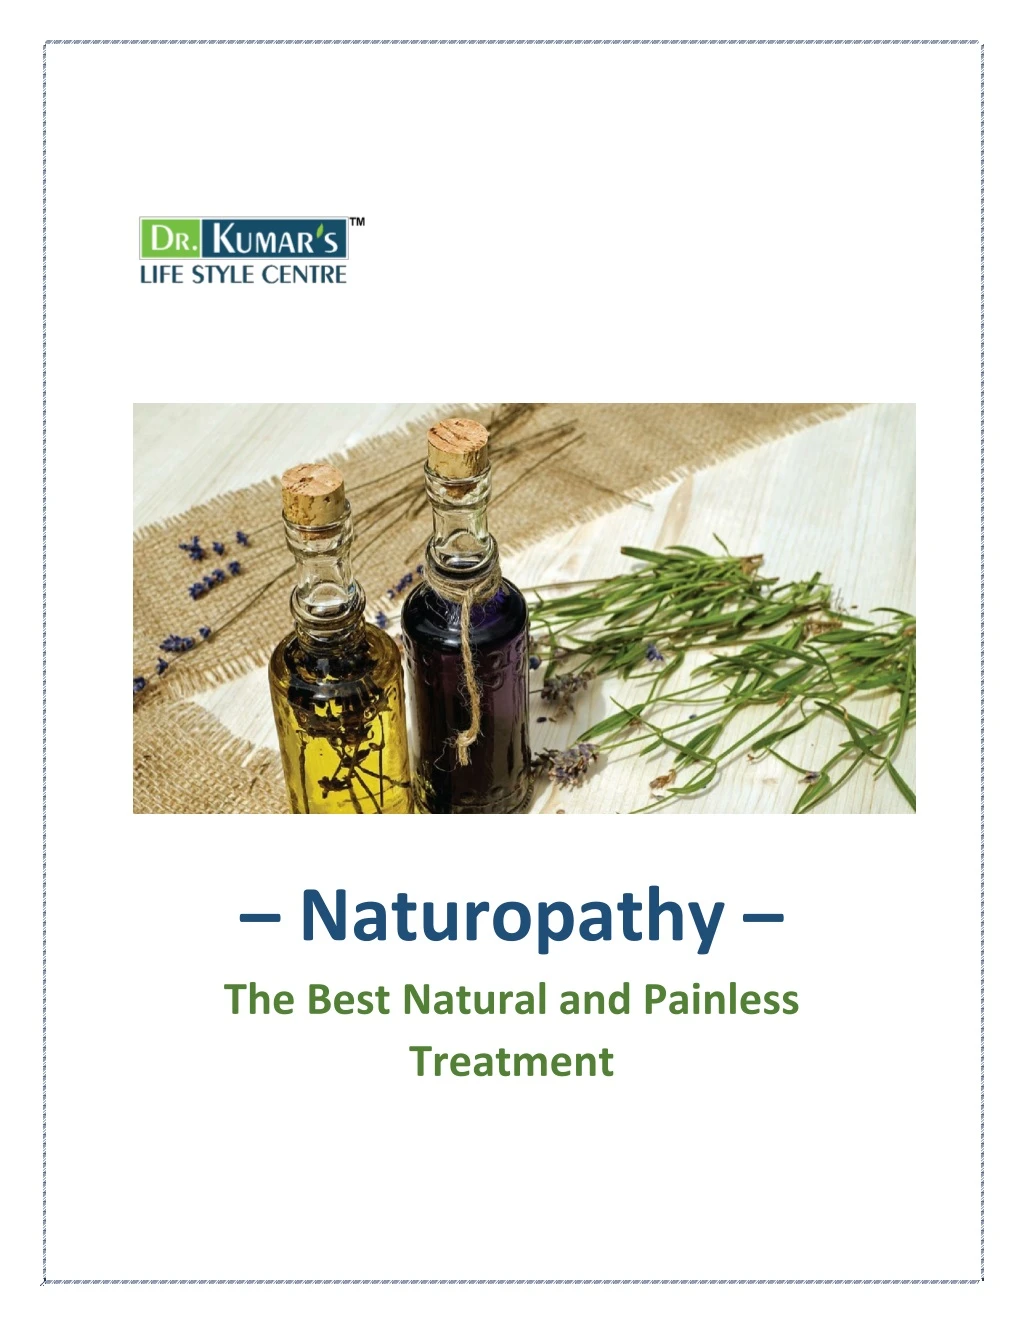 naturopathy the best natural and painless